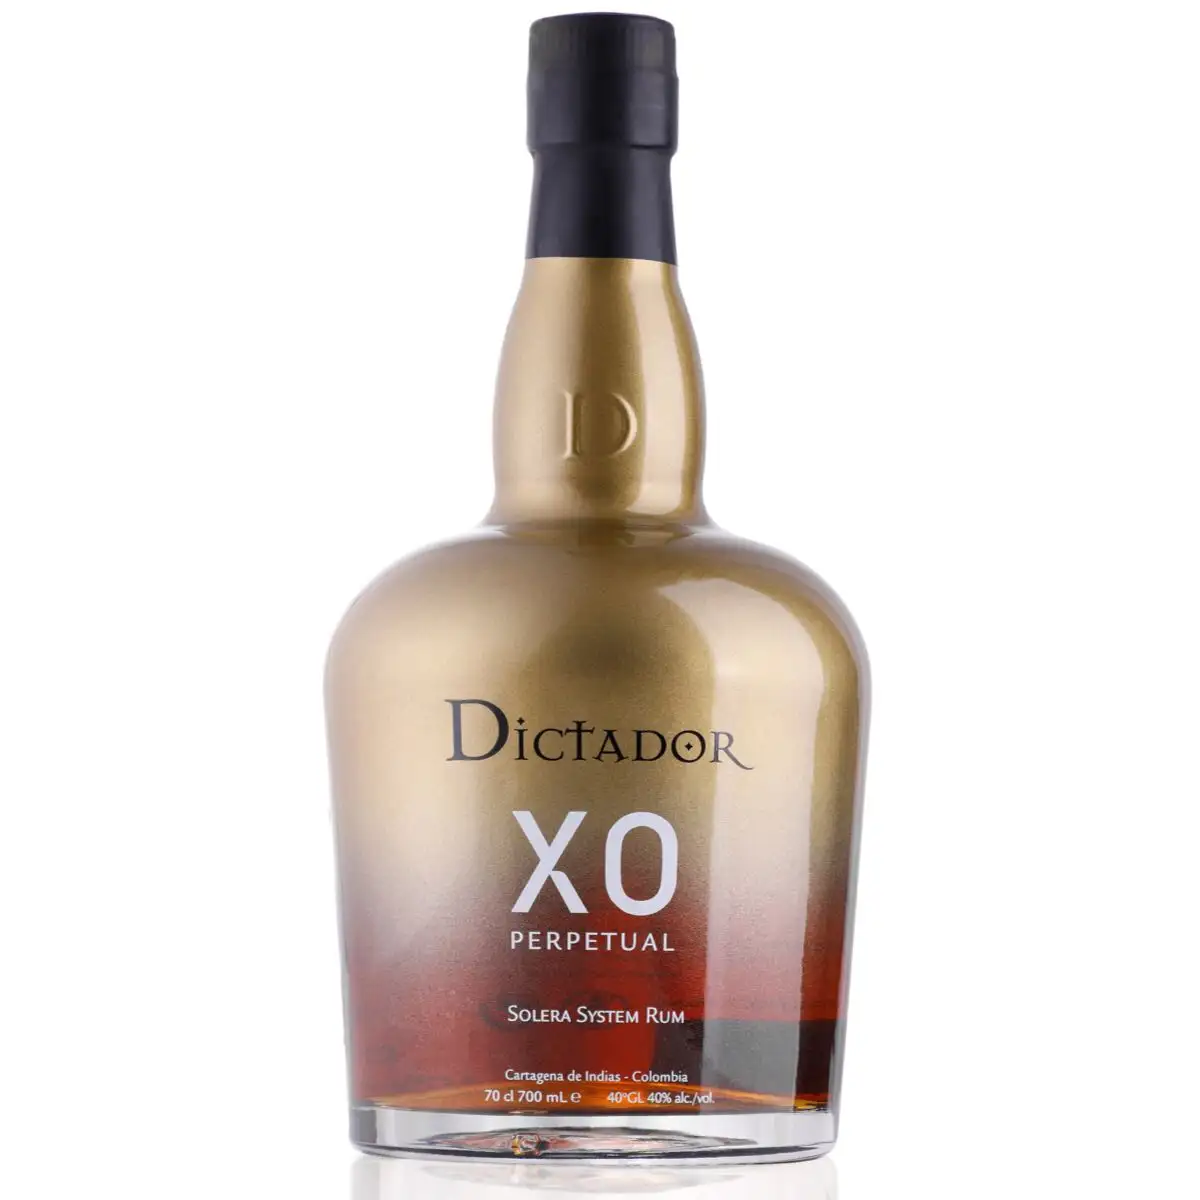 Image of the front of the bottle of the rum Dictador XO Perpetual / Aurum